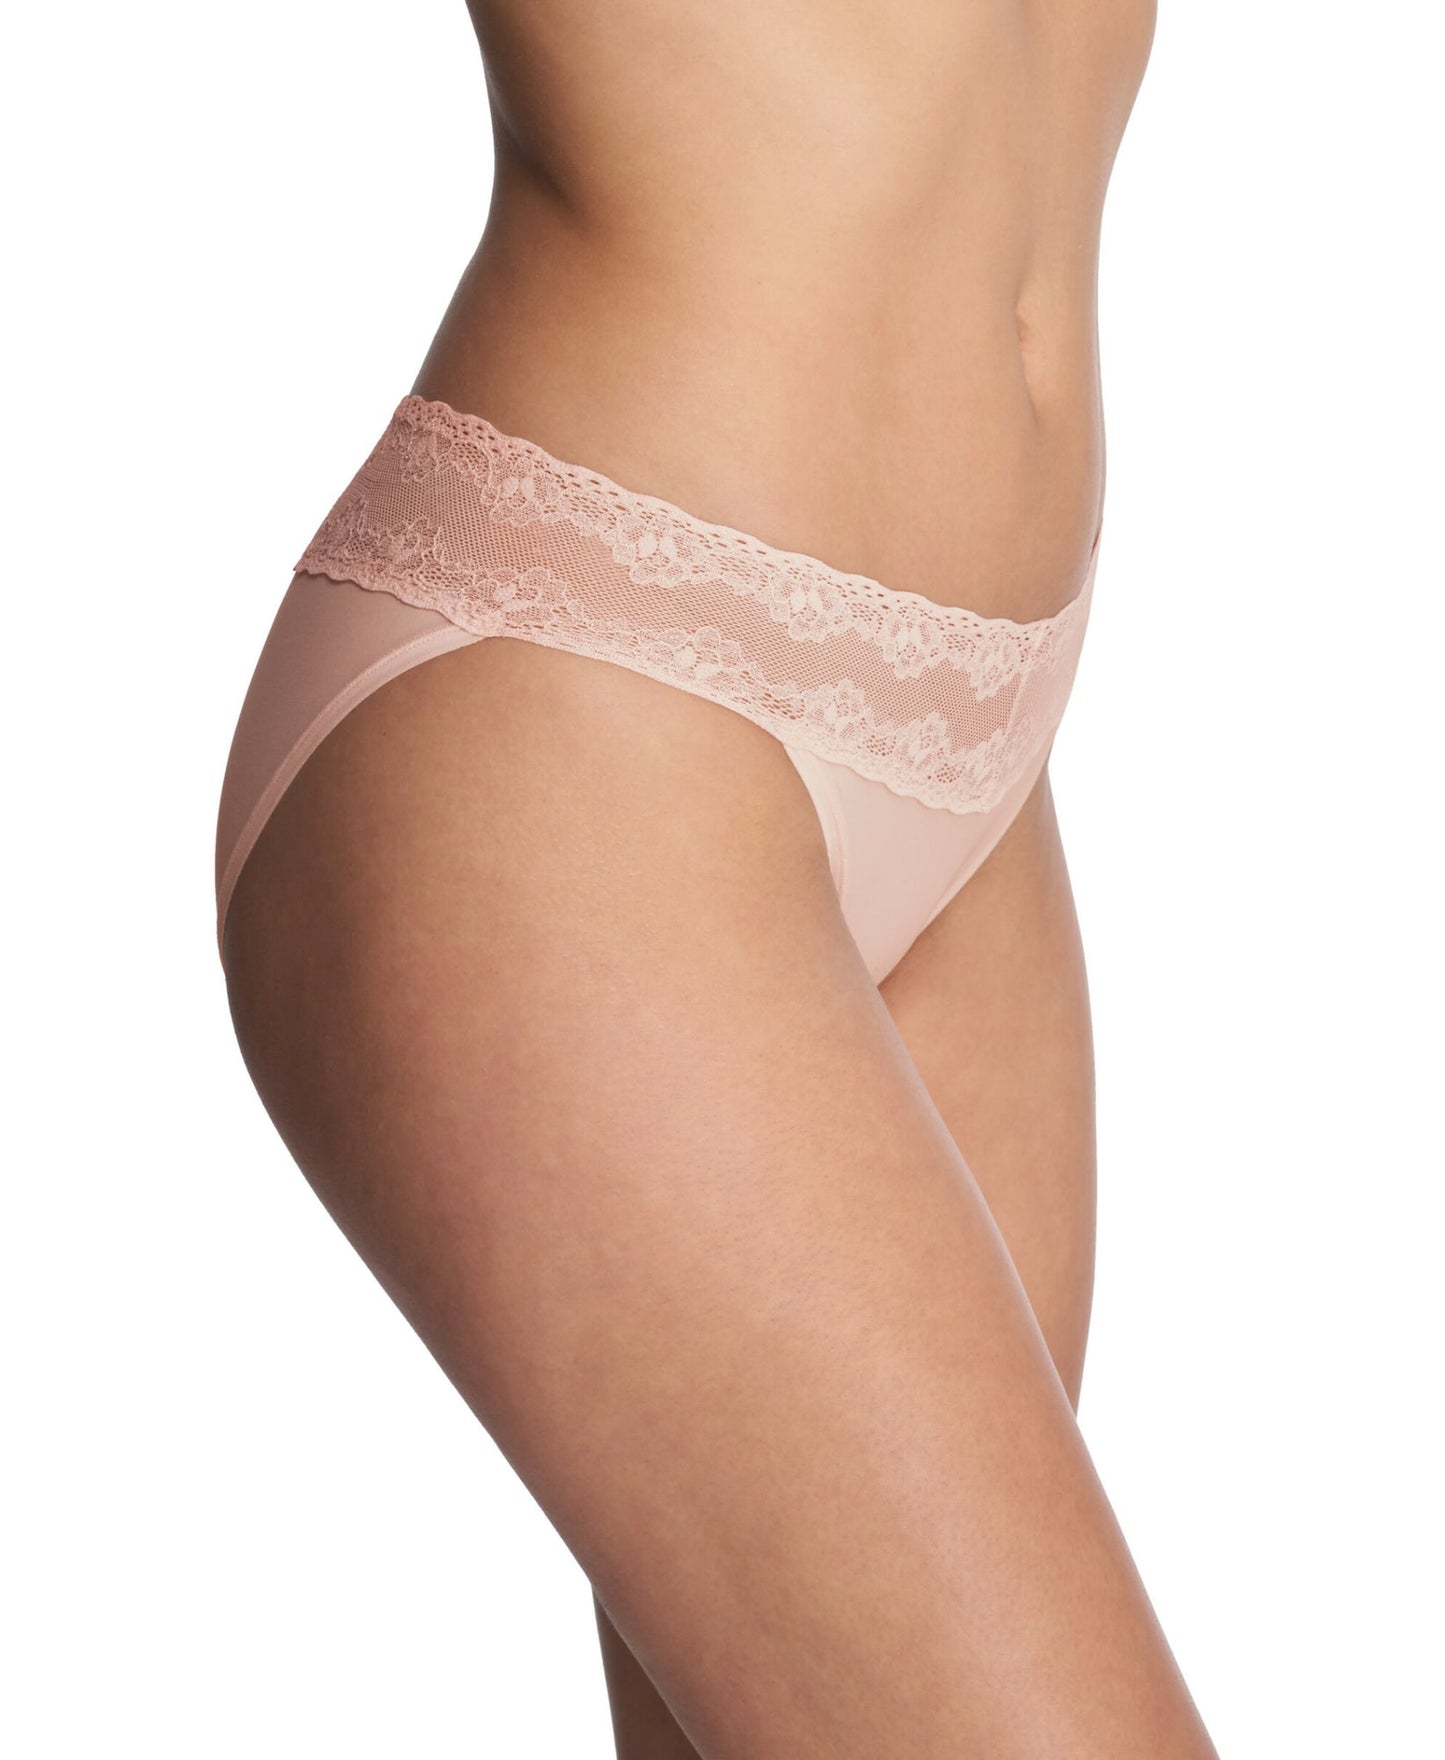 Bliss Perfection vikini - new spring colors